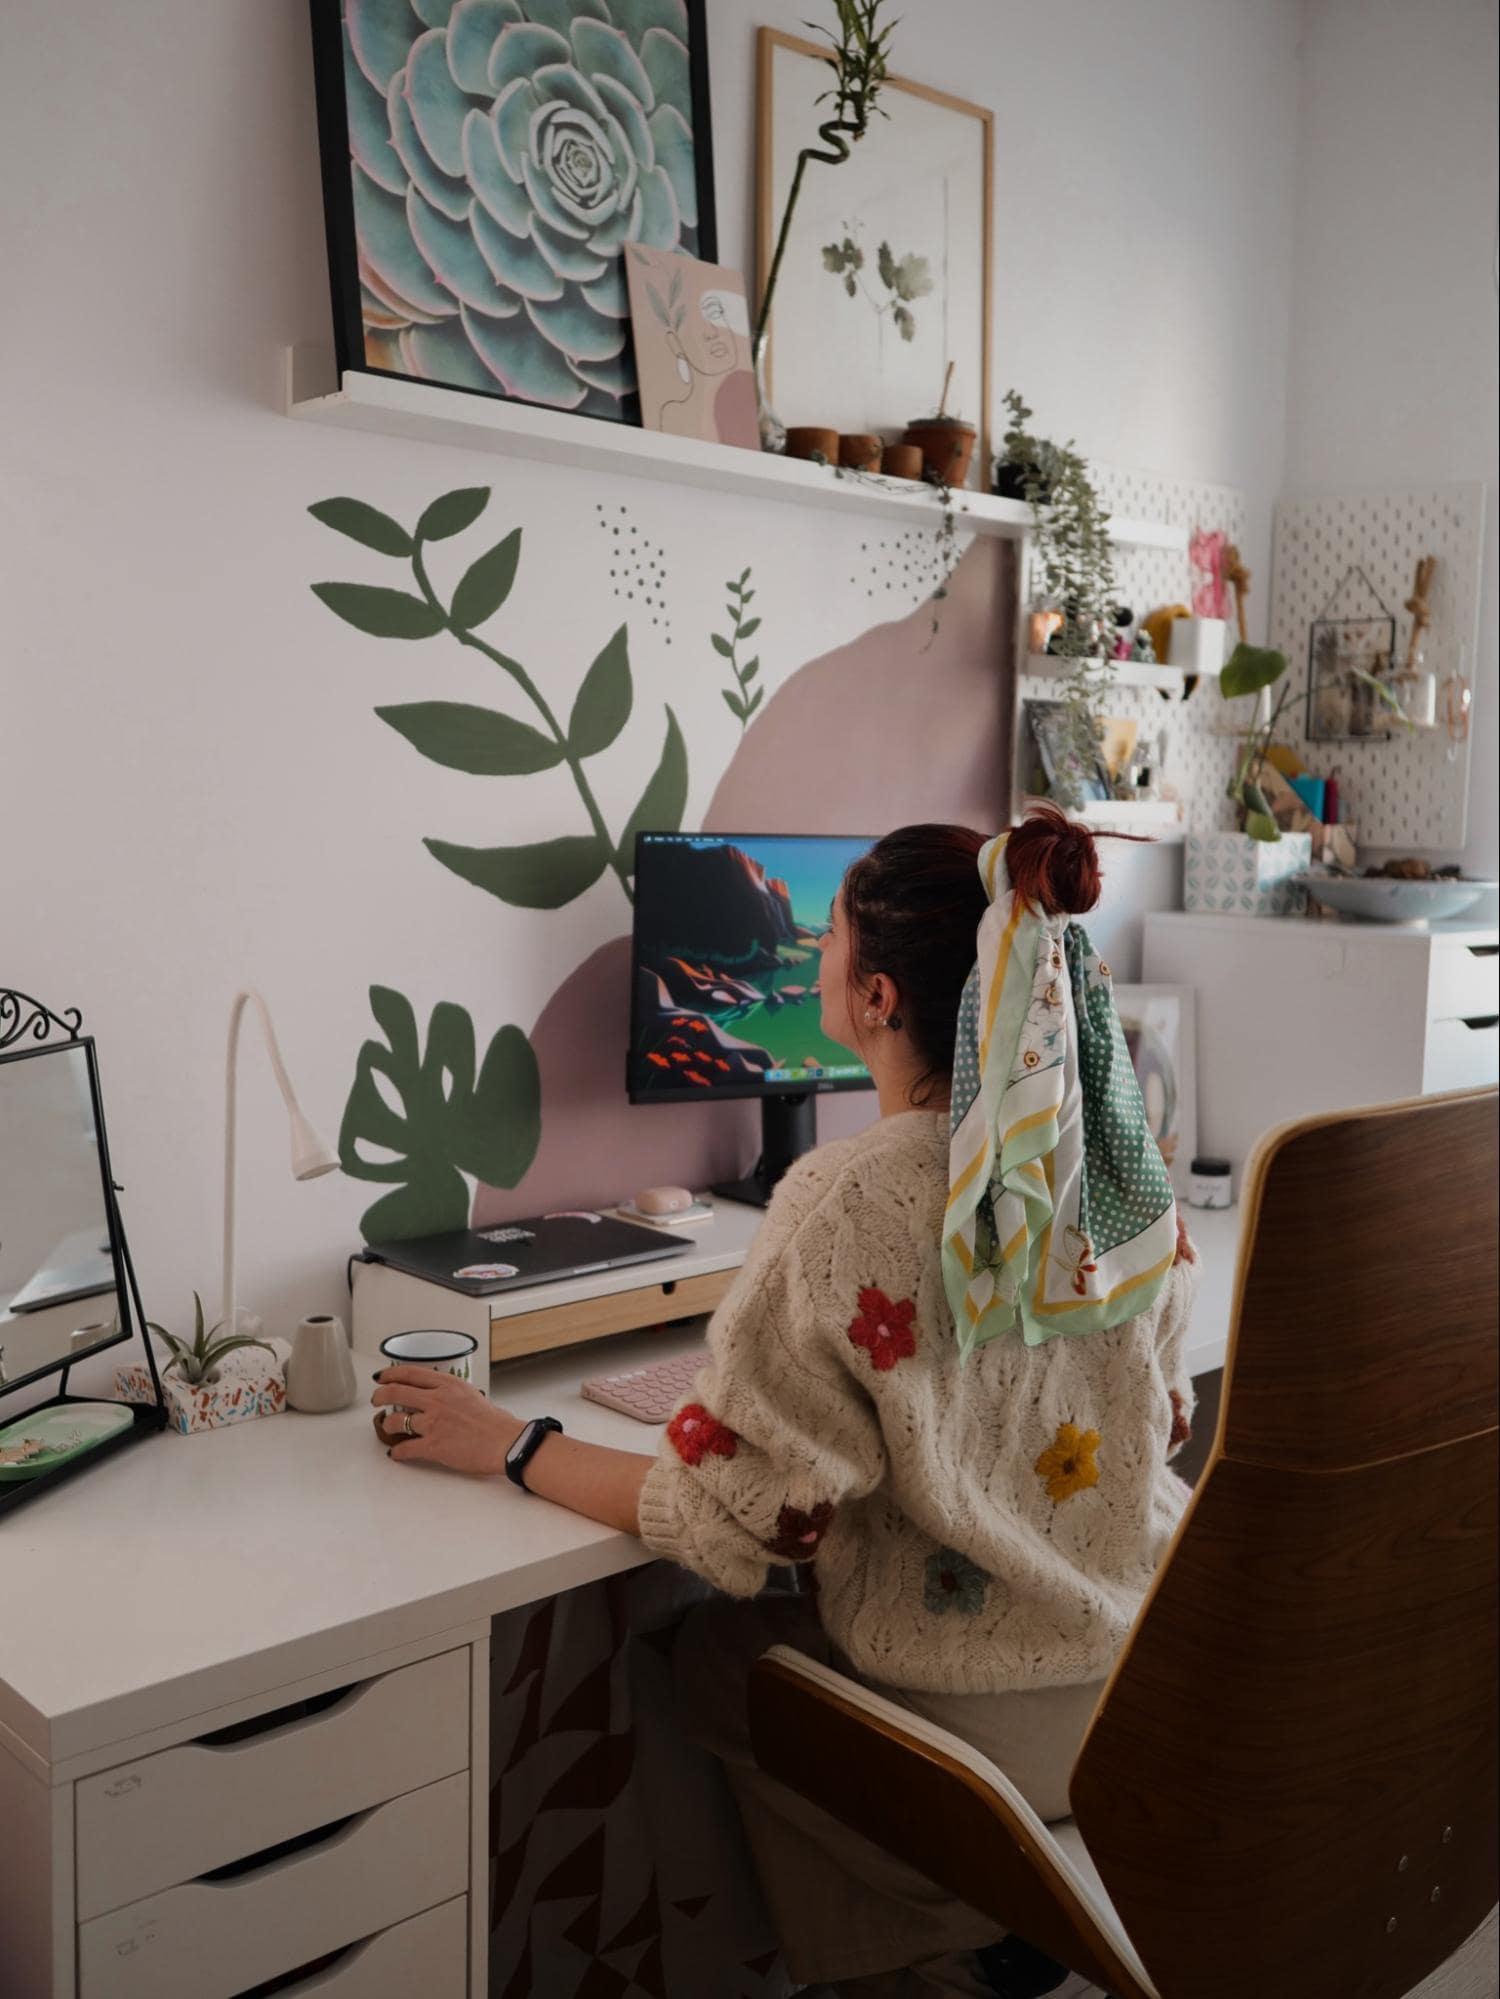 Stefana Teodoroiu, a content creator from Bucharest, Romania, at her DIY home office